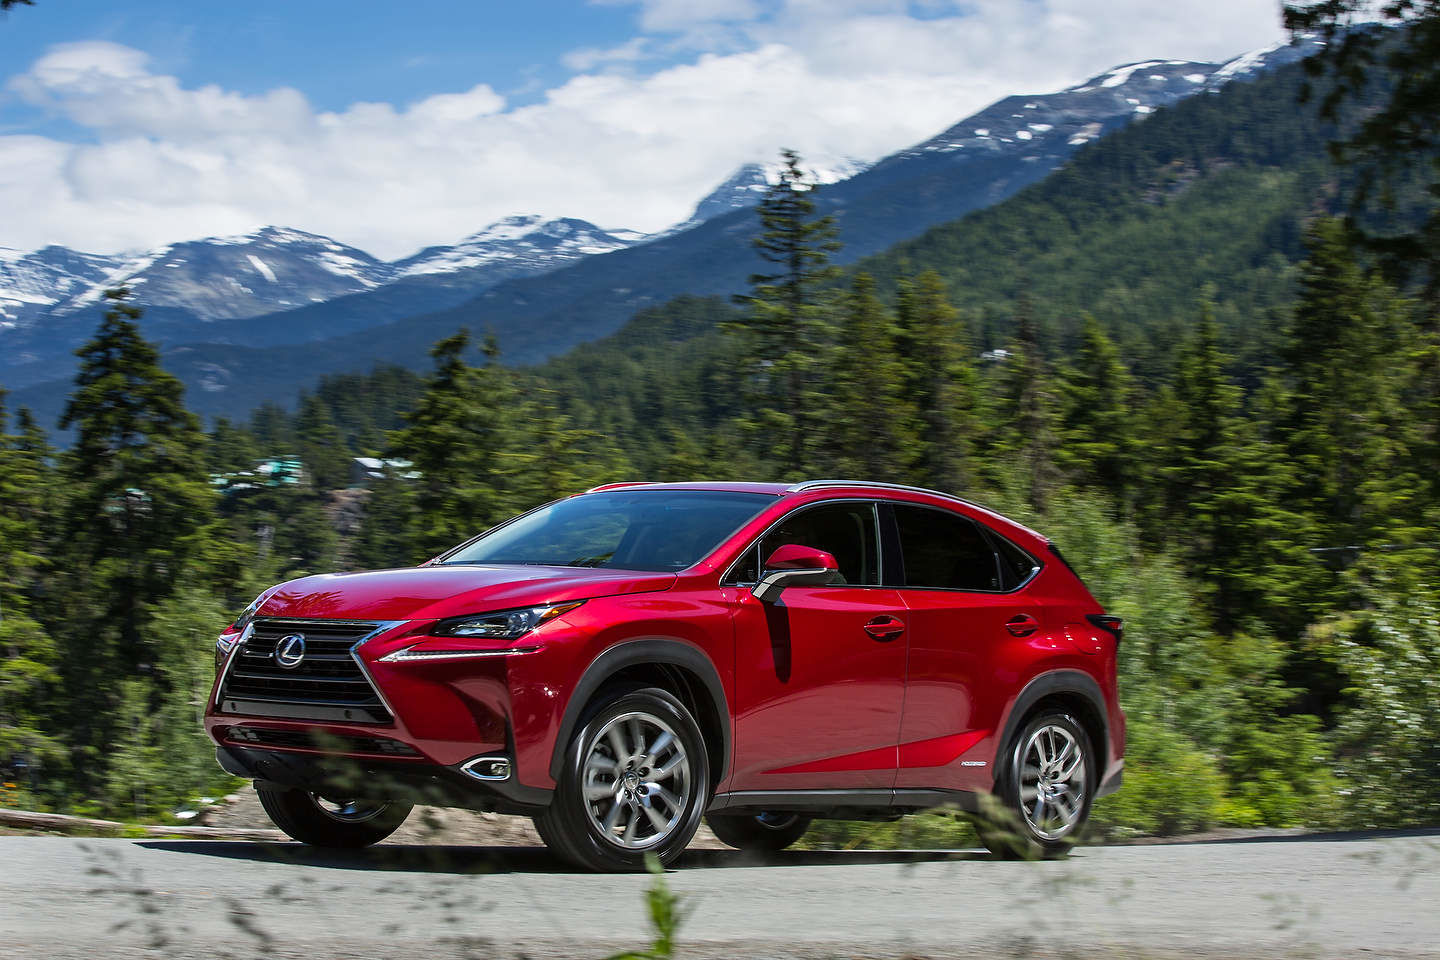 2021 Lexus NX vs. 2021 Audi Q5: Compact Luxury Without the Full-Size Price